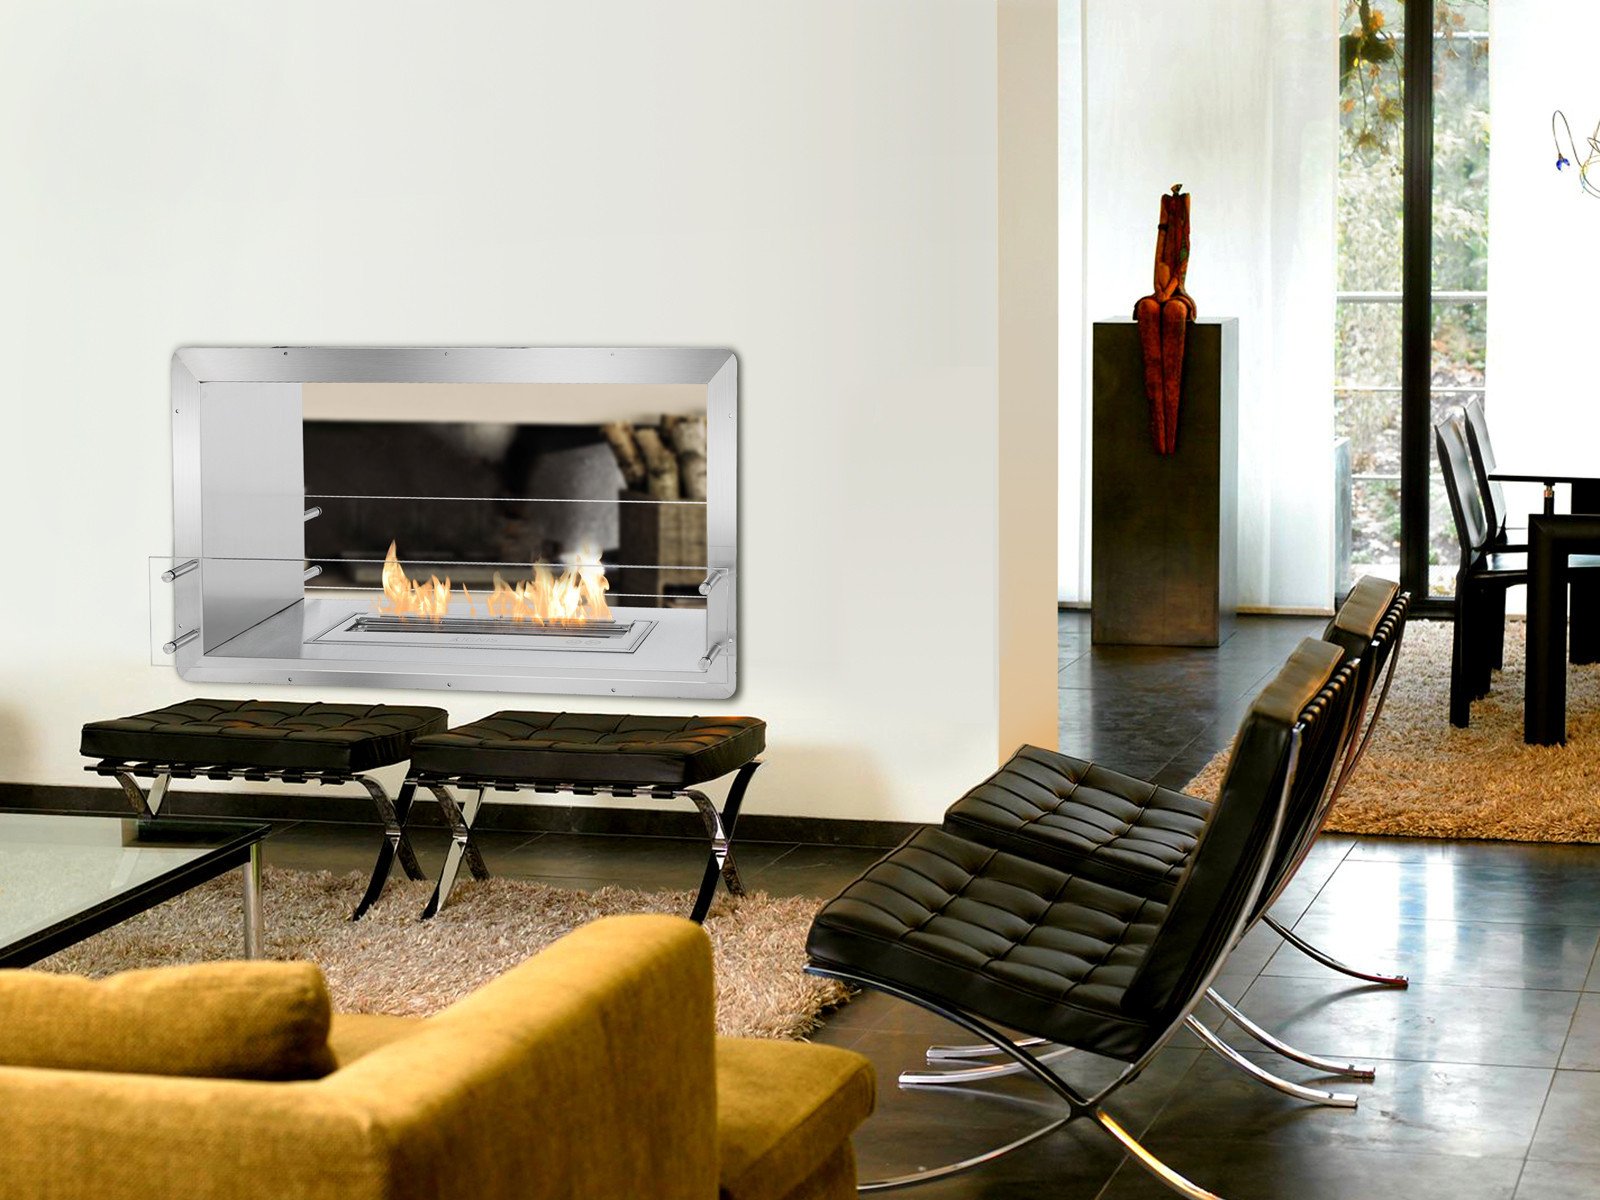 How to Make An Electric Fireplace Look Built In Fresh Modern Fireplaces 5 Smart Placement Ideas Modern Blaze